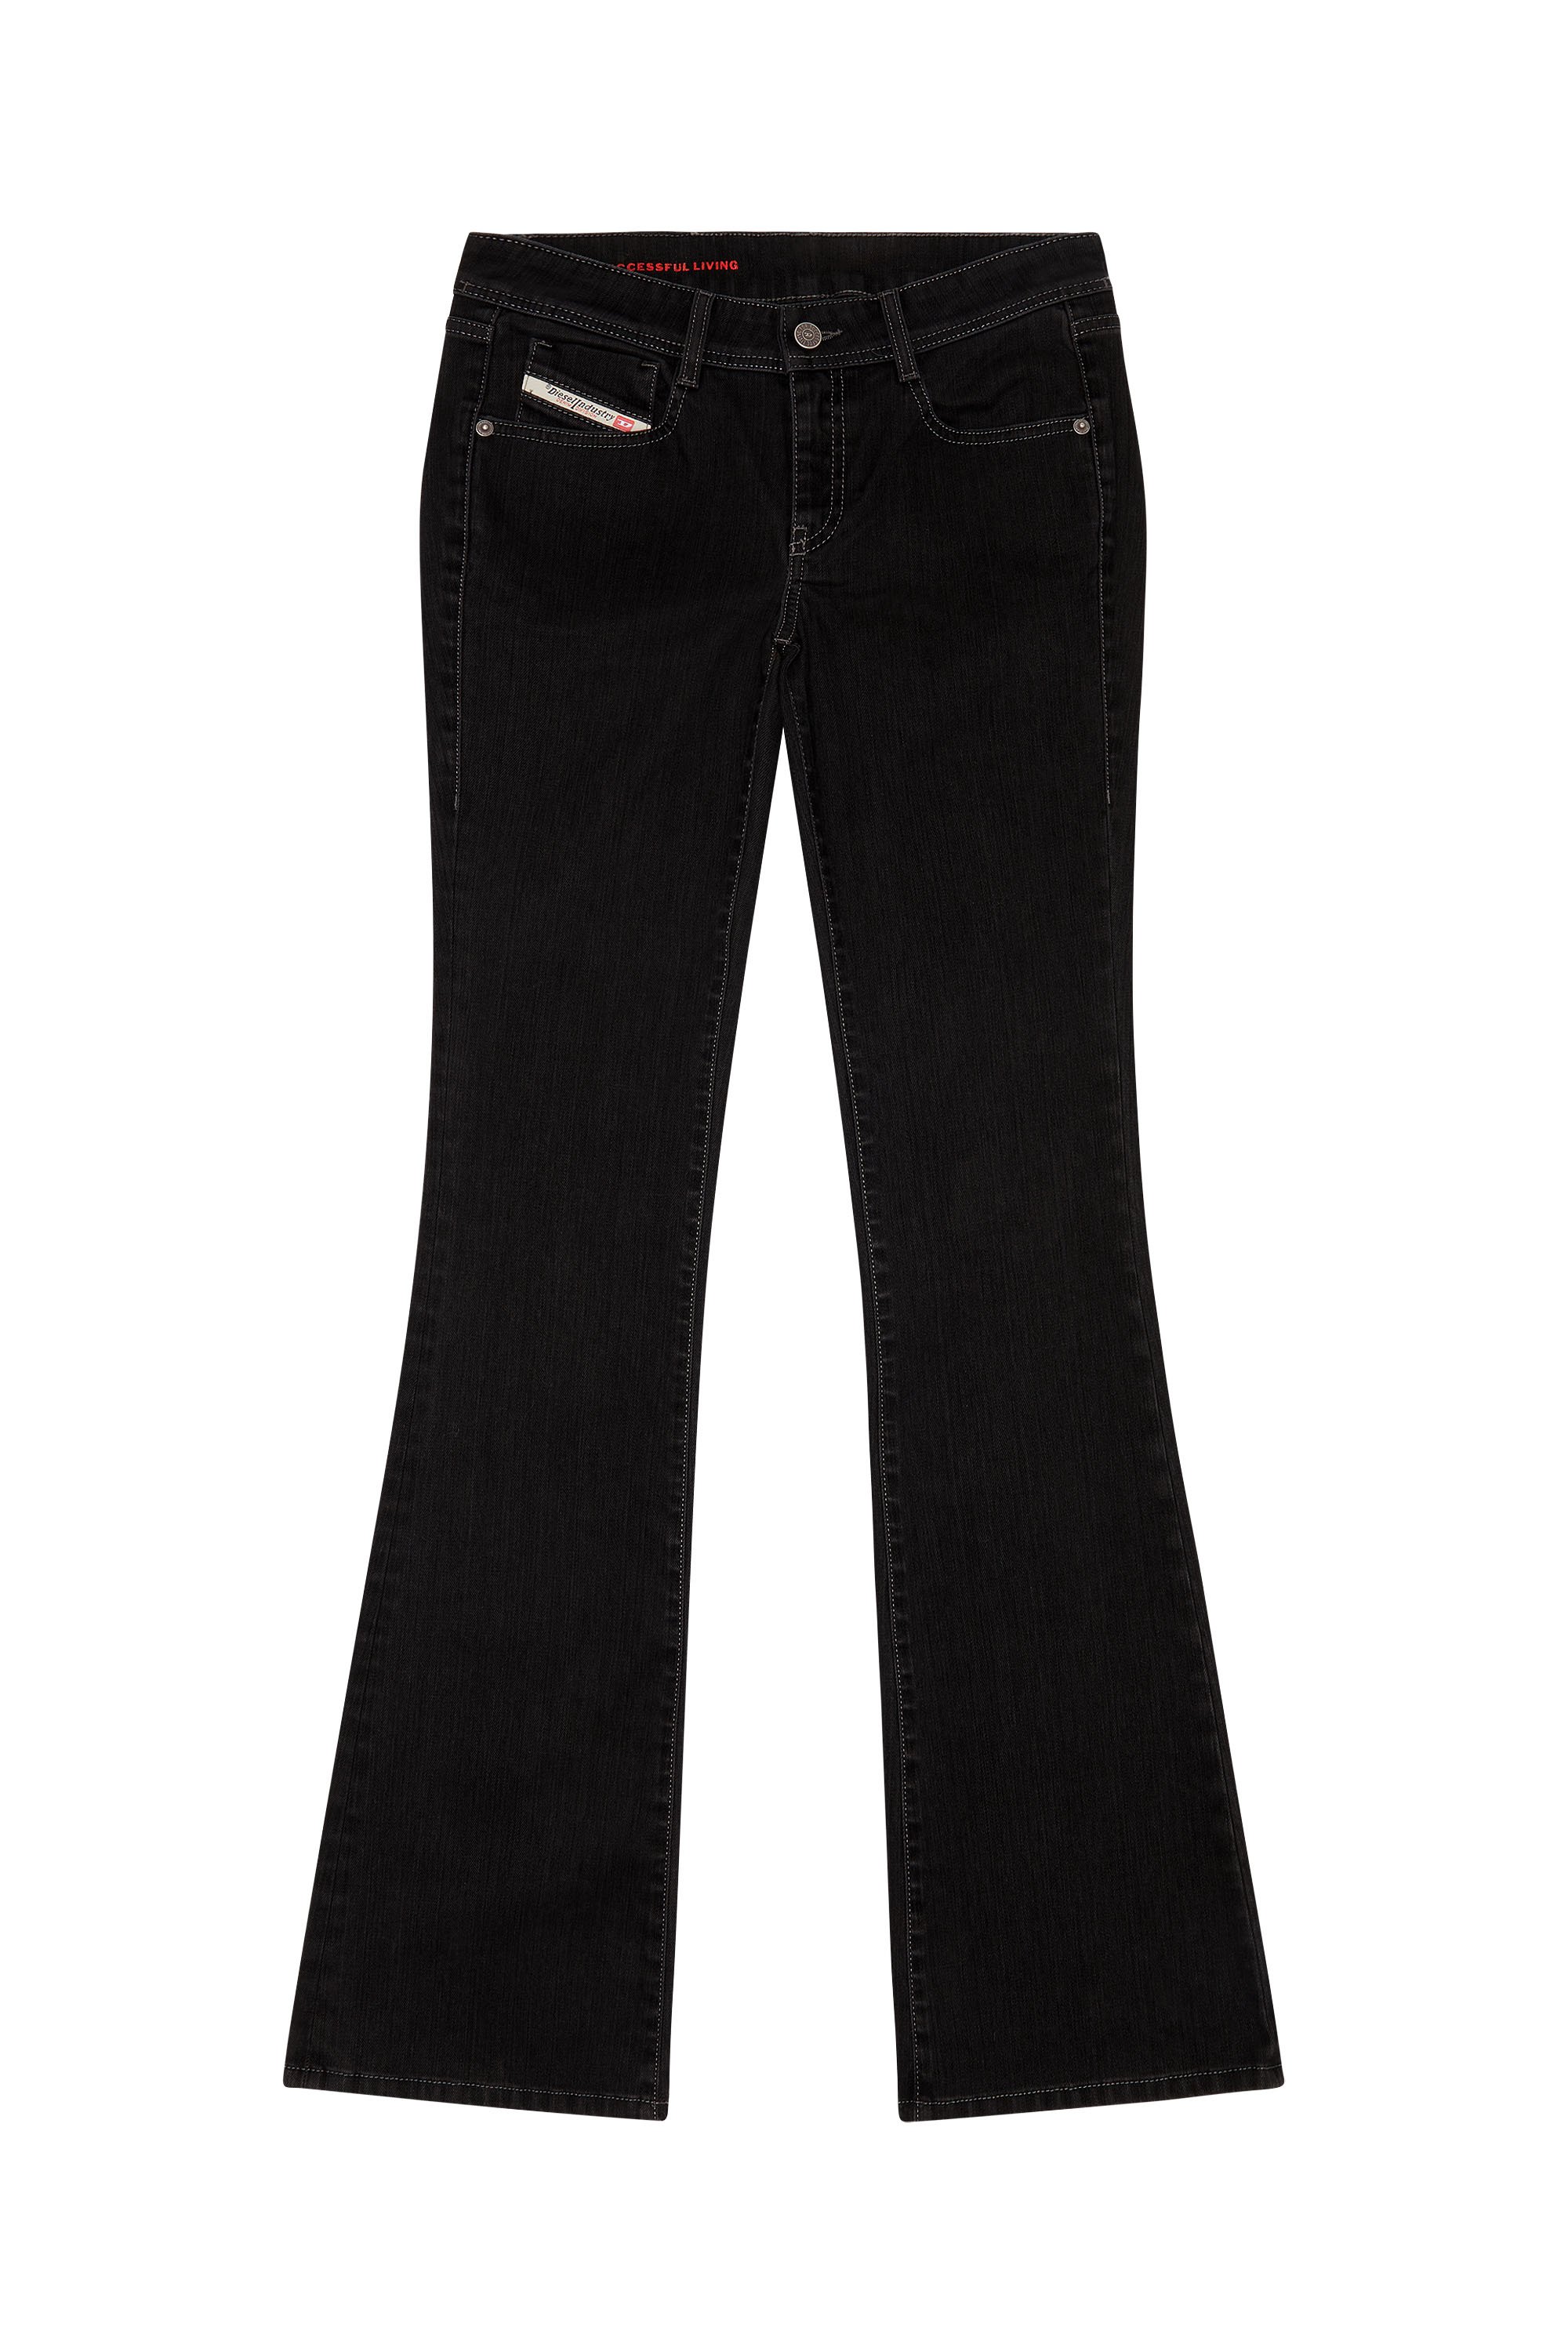 1969 D-EBBEY 0IHAO Bootcut and Flare Jeans, Schwarz/Dunkelgrau - Jeans